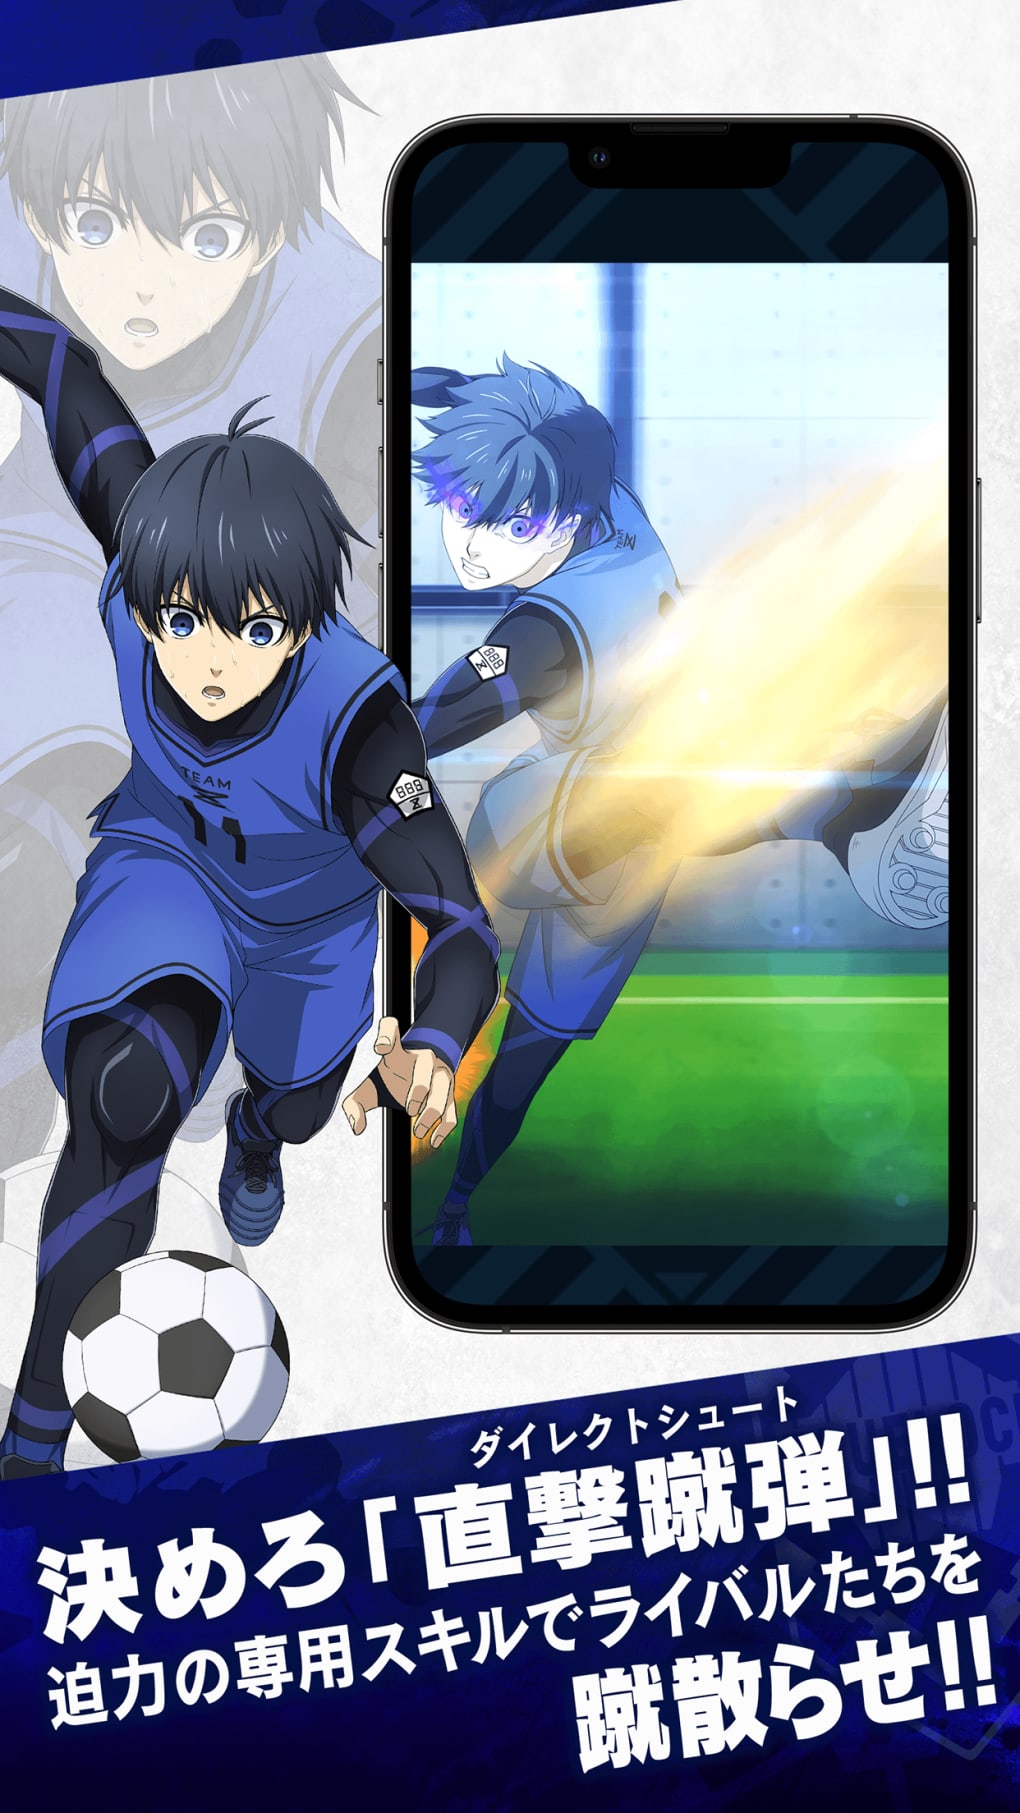 Blue Lock Project: World Champion Released for Android and iOS in Japan